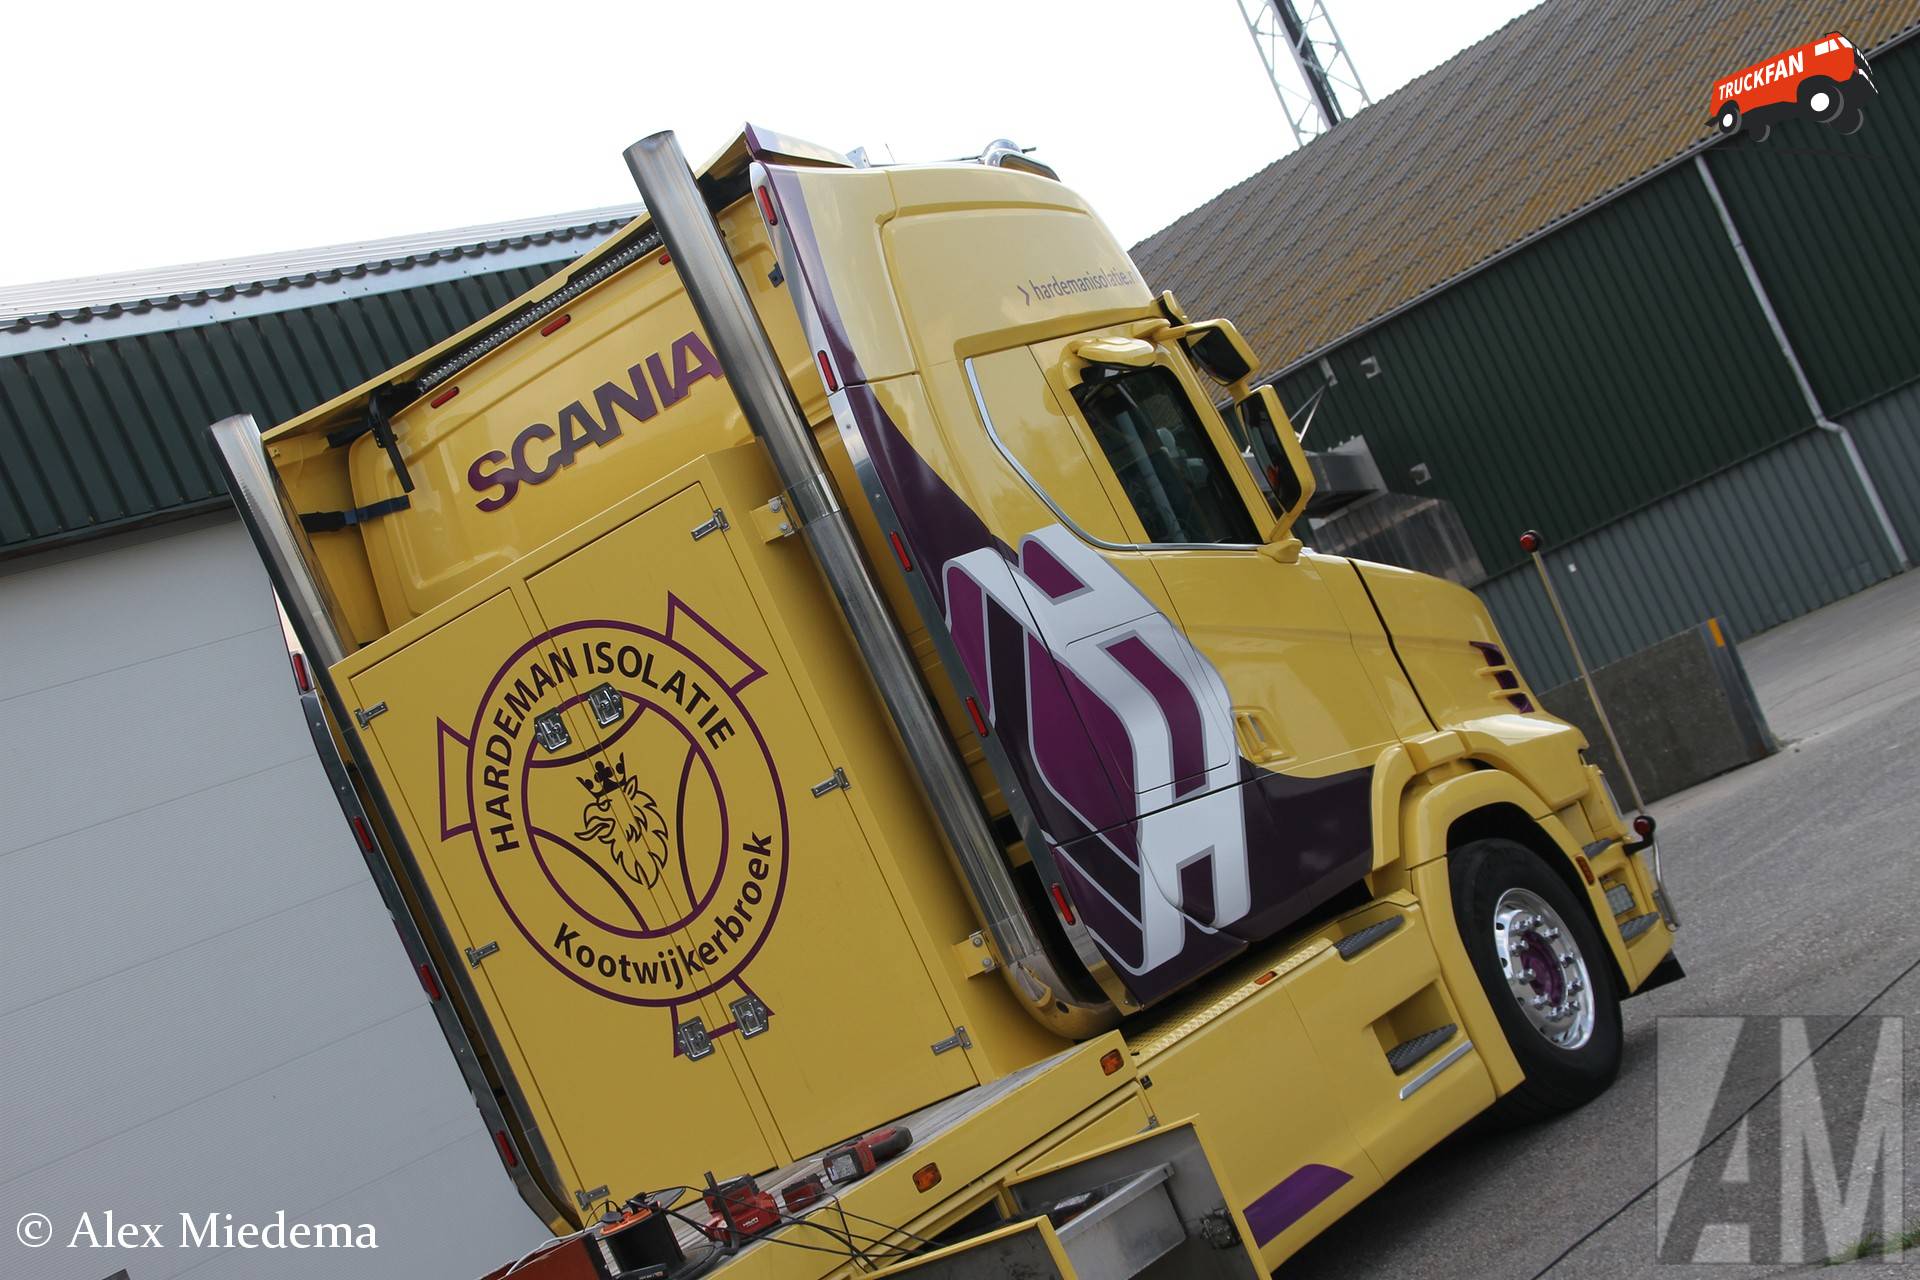 Scania S650T